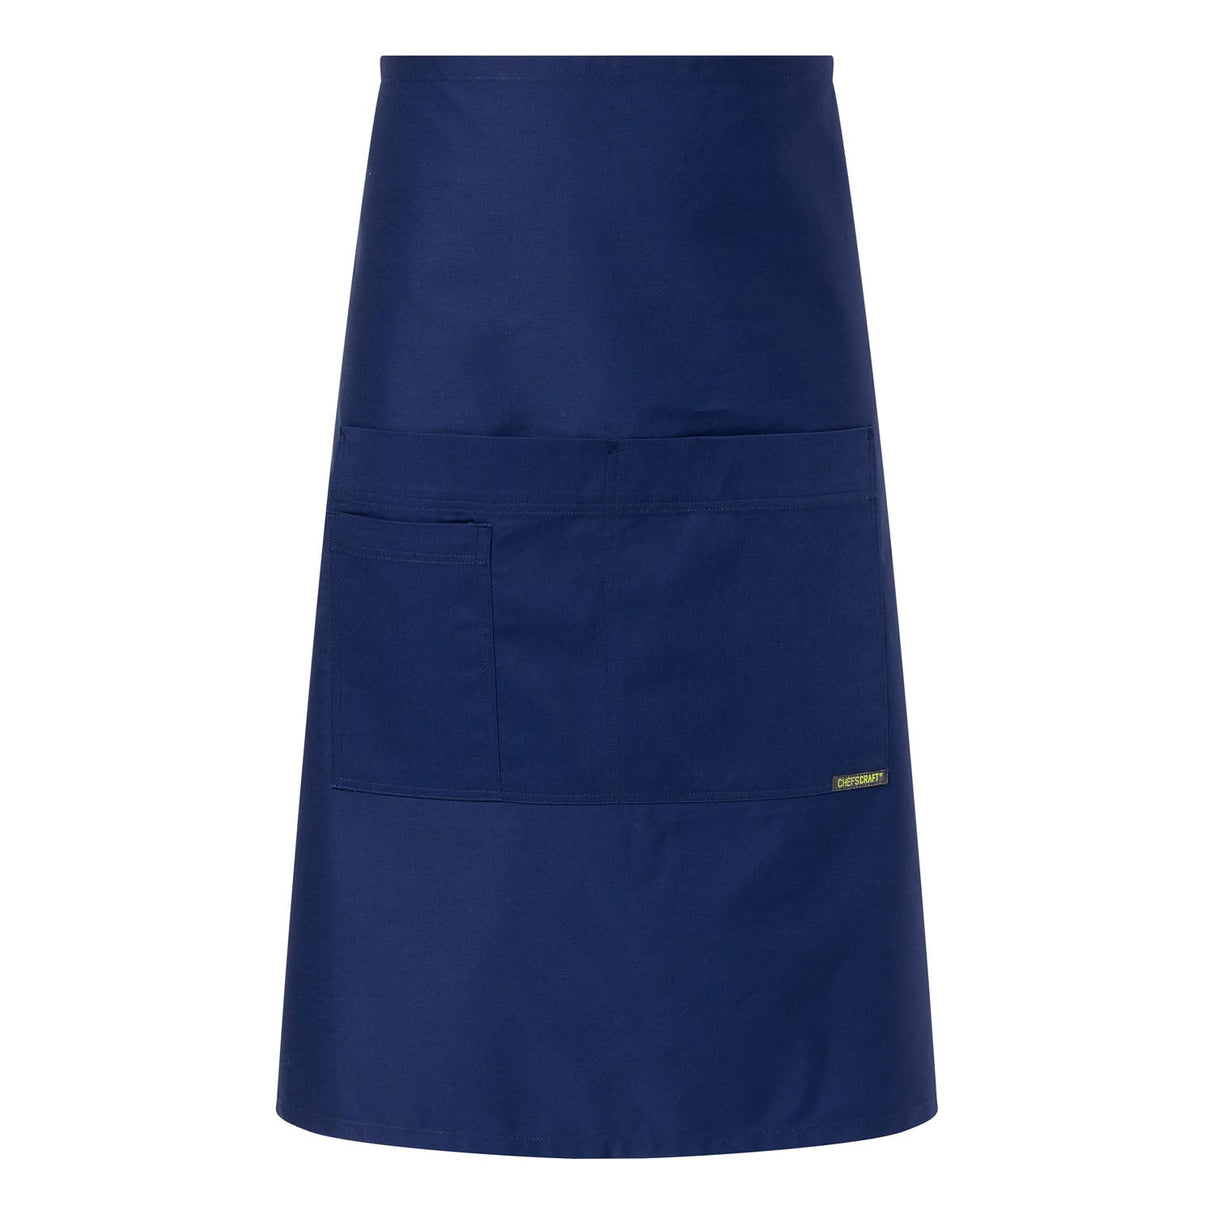 CA032 3/4 Apron With Pockets